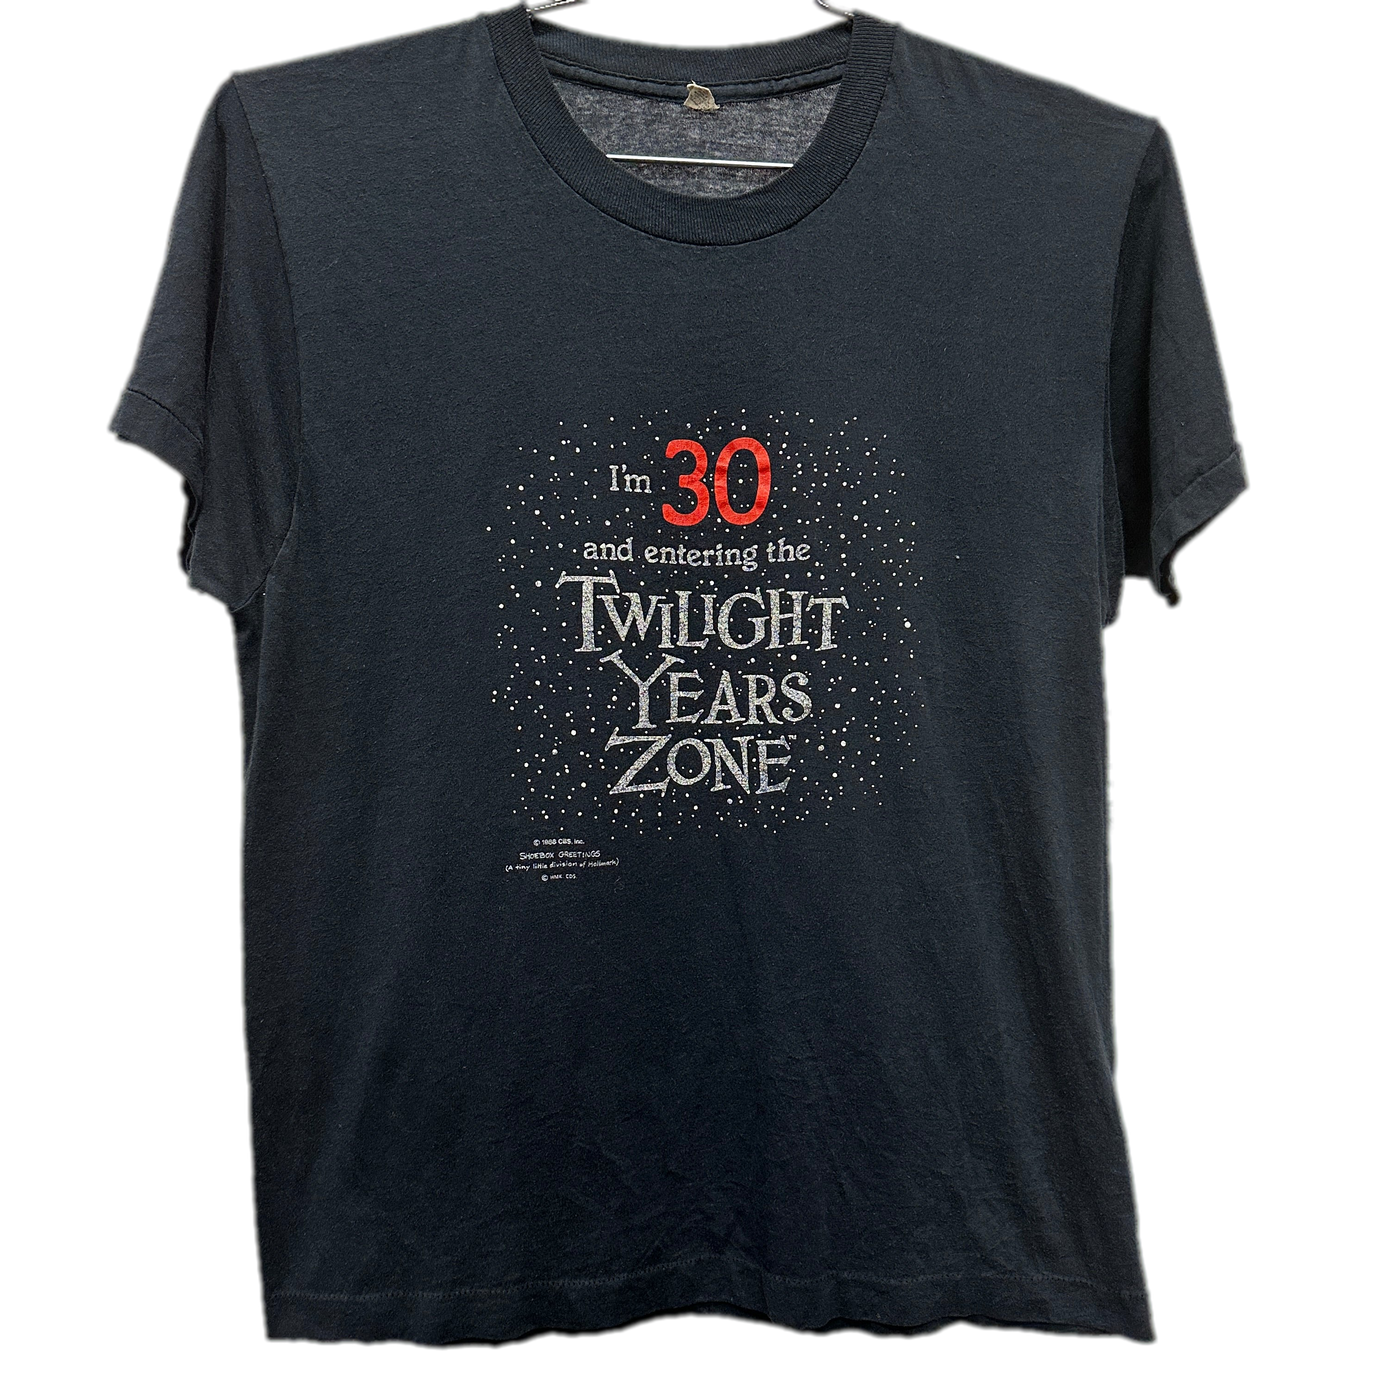 '88 "I'm 30 And Entering The Twilight Zone Years" Black Movie T-shirt sz L